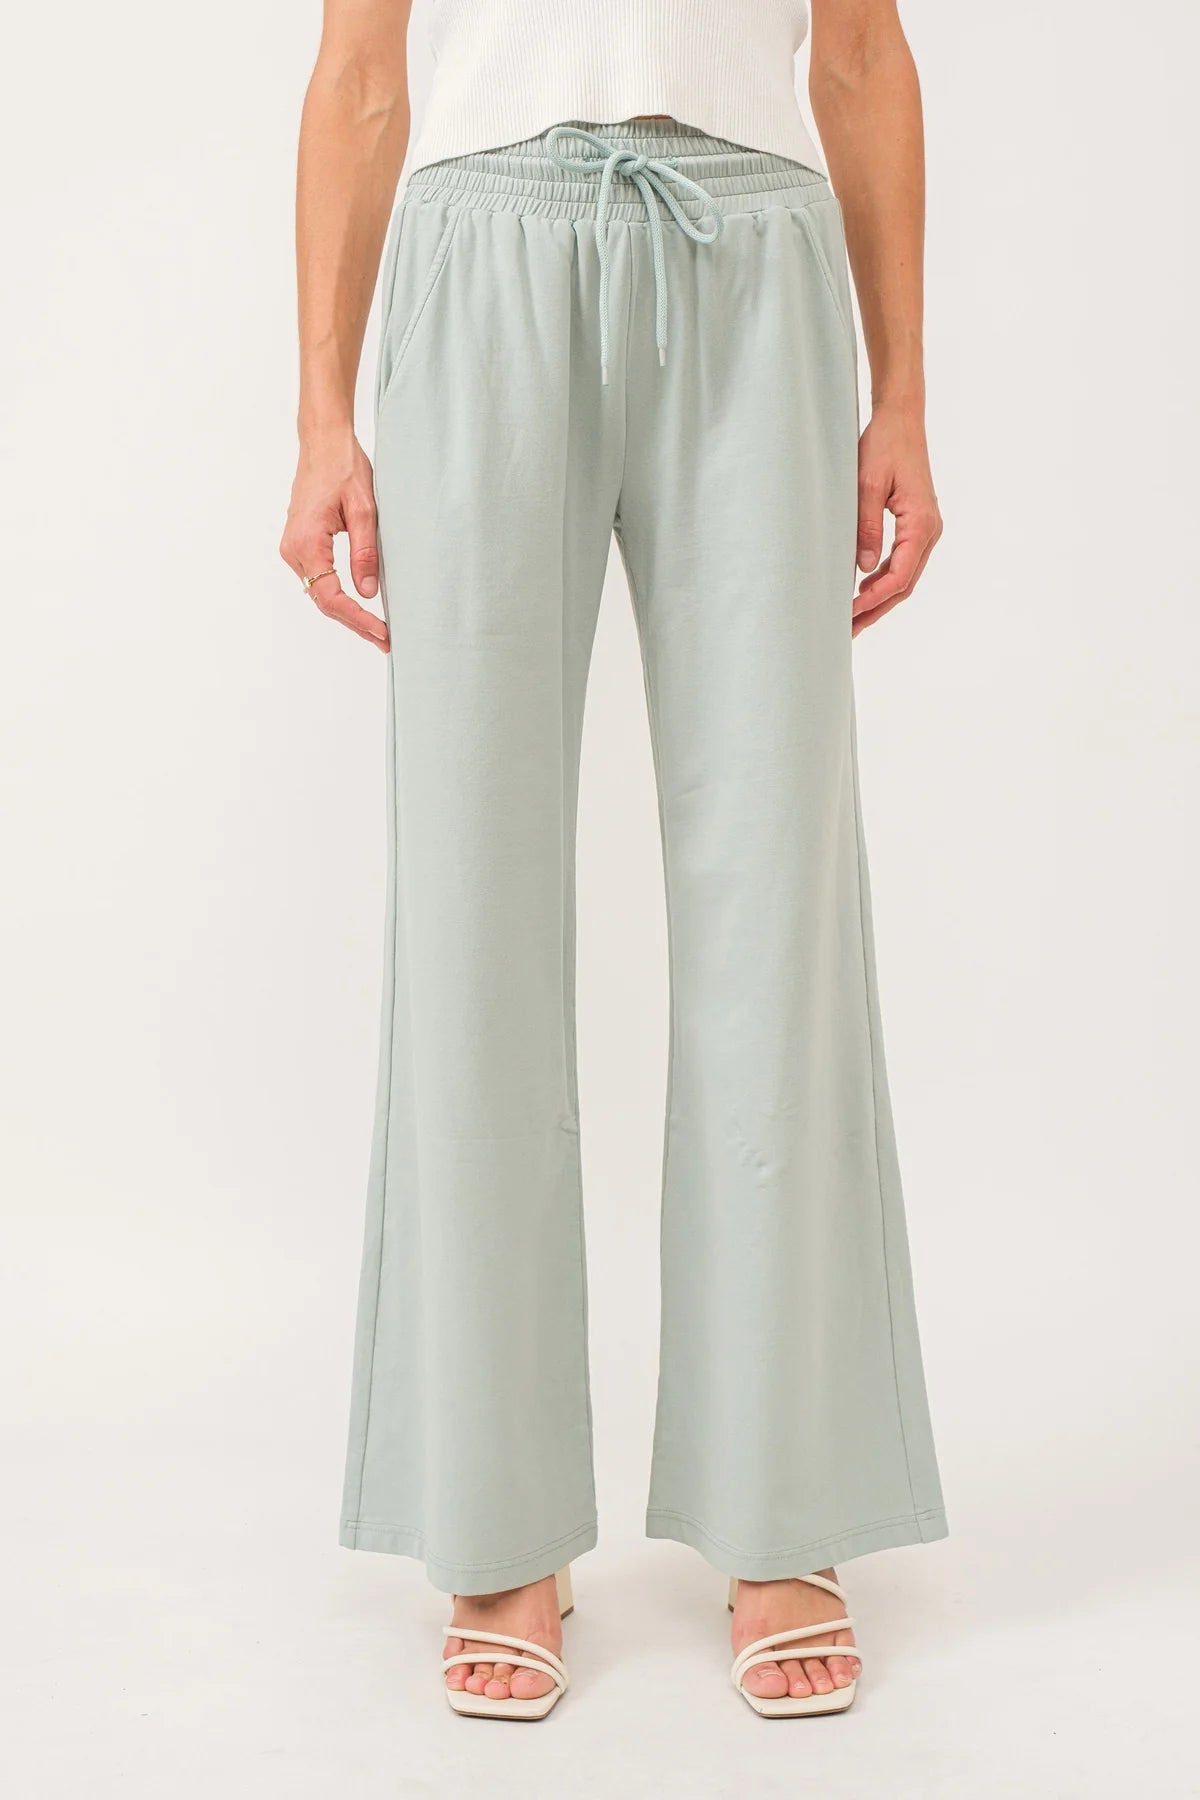 Another Love Quincy Wide Leg Pant in Aloe